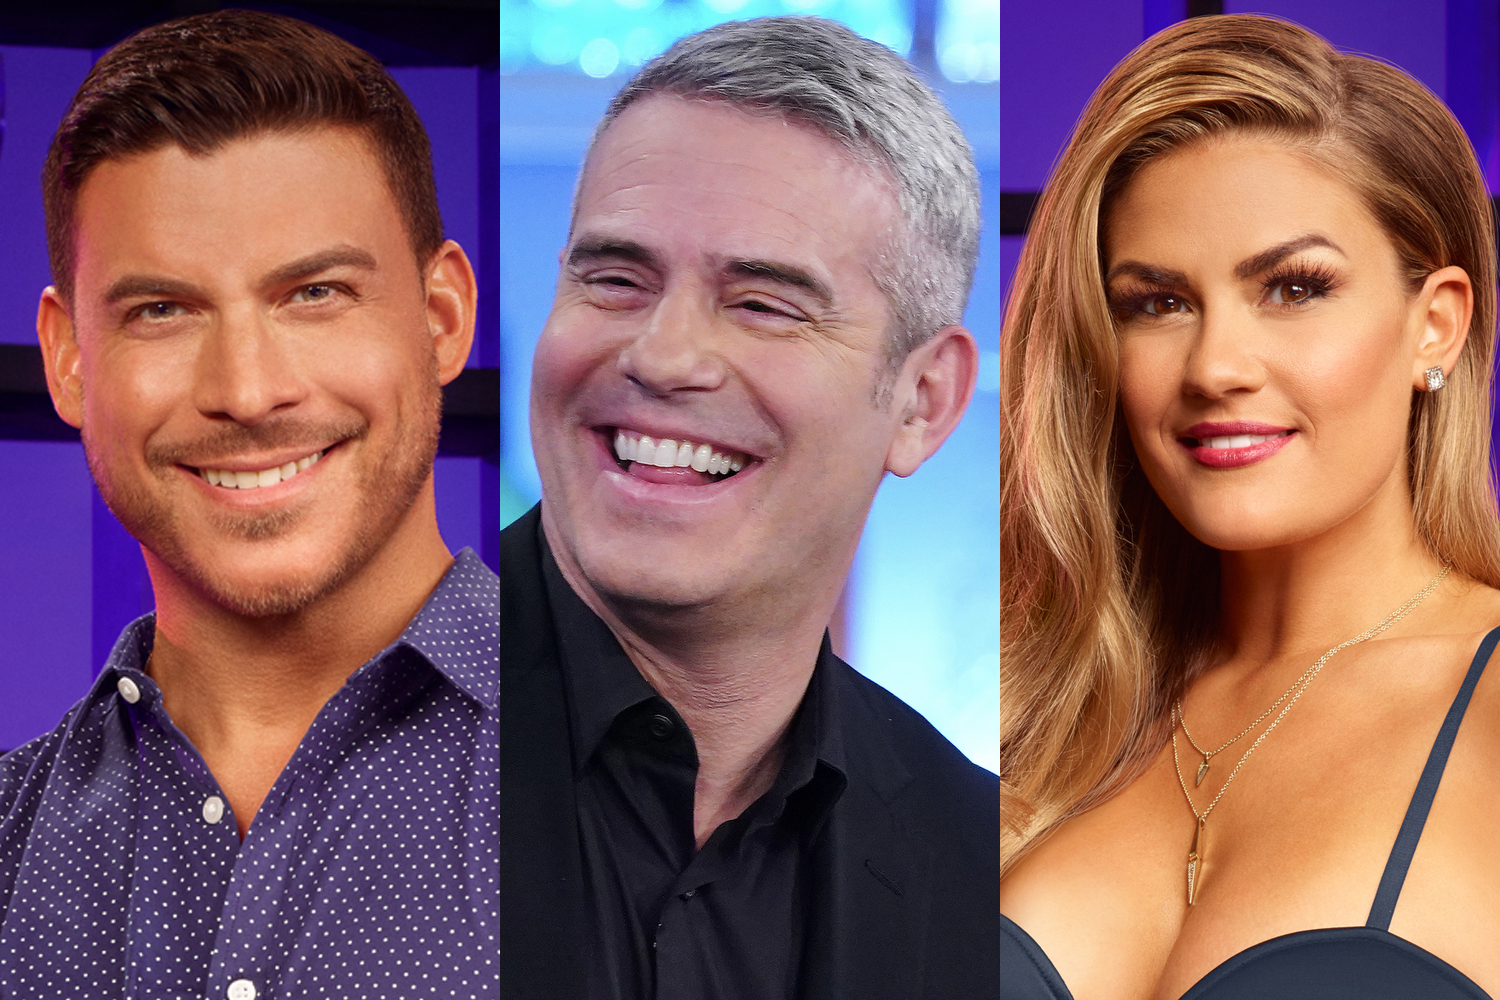 Jax Taylor, Andy Cohen, and Brittany Cartwright